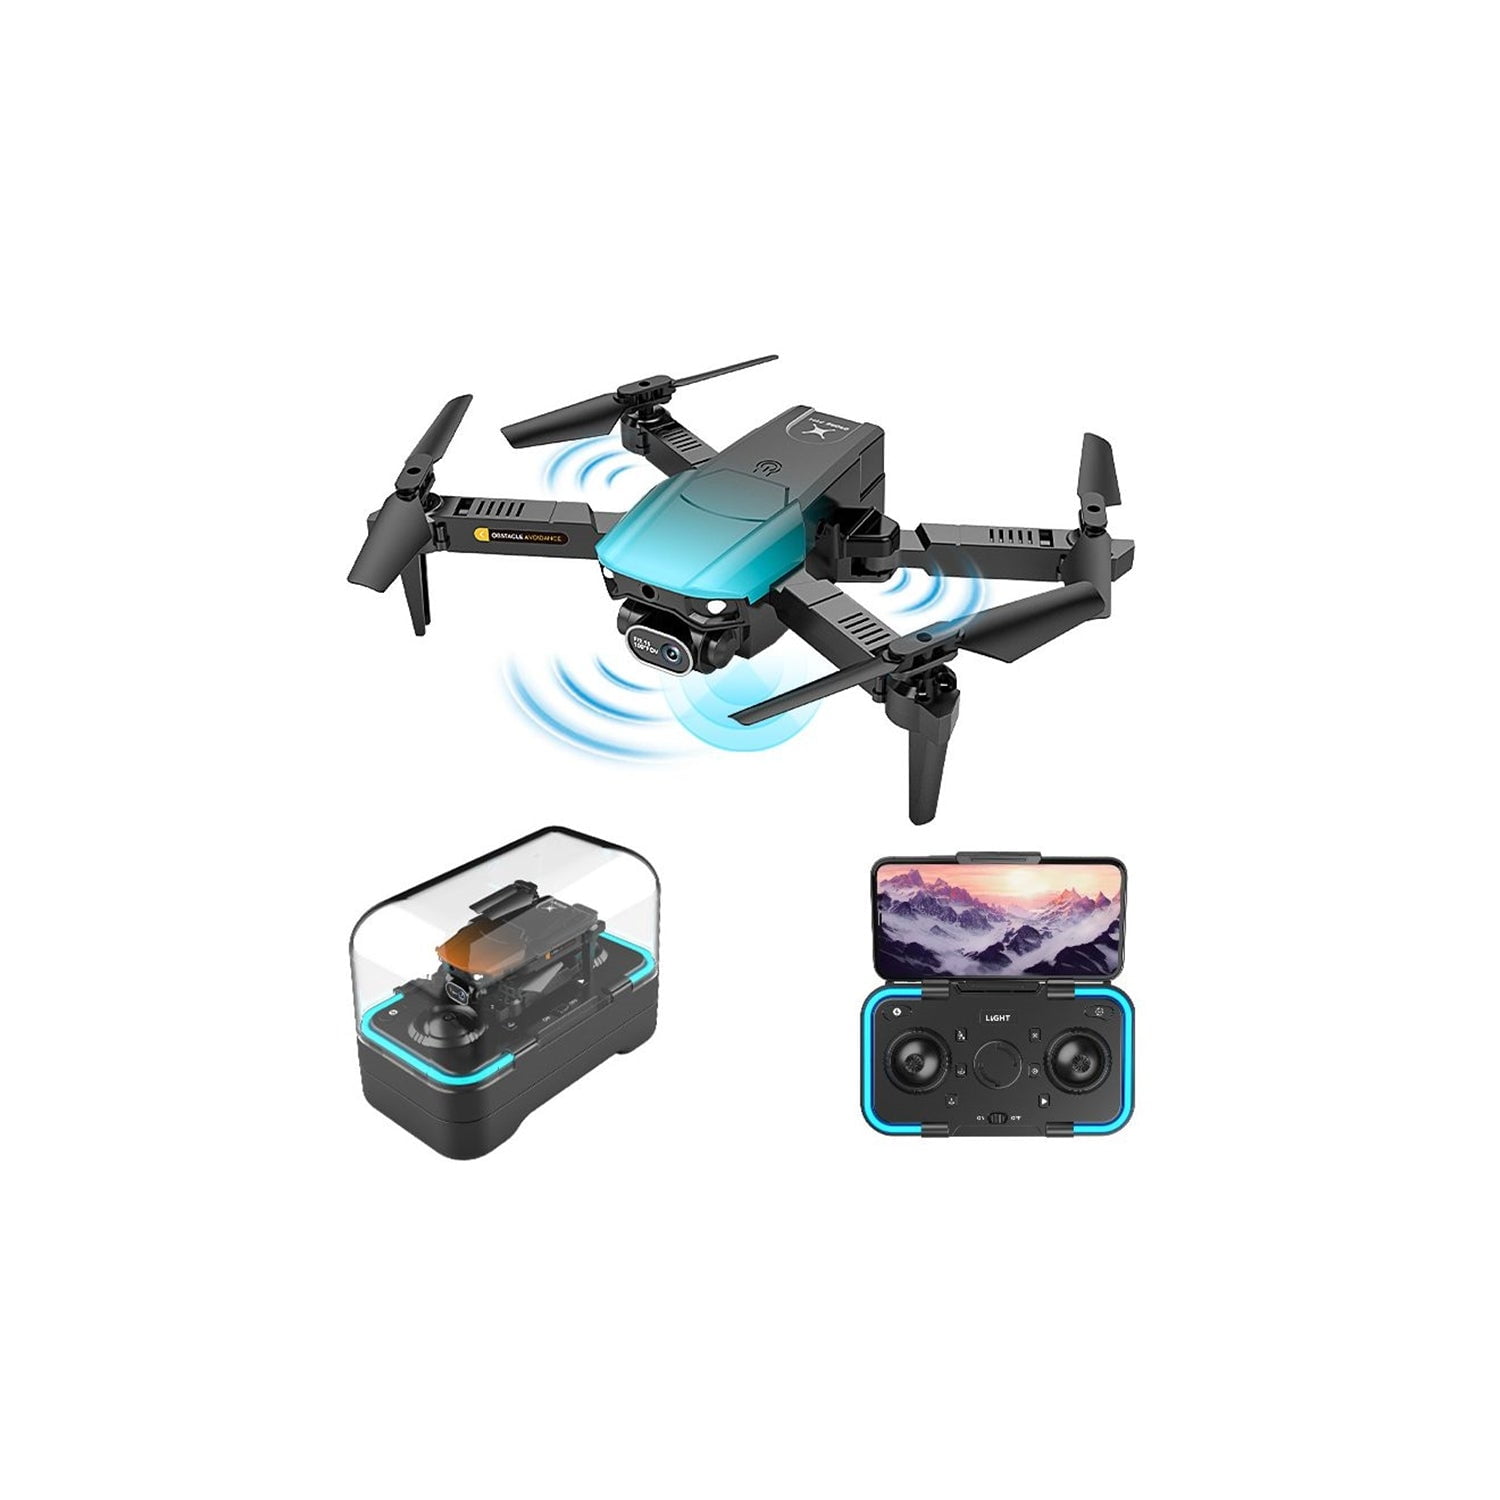 ZFR Drone With 2 Cameras for Sale in Peachtree Corners, GA - OfferUp